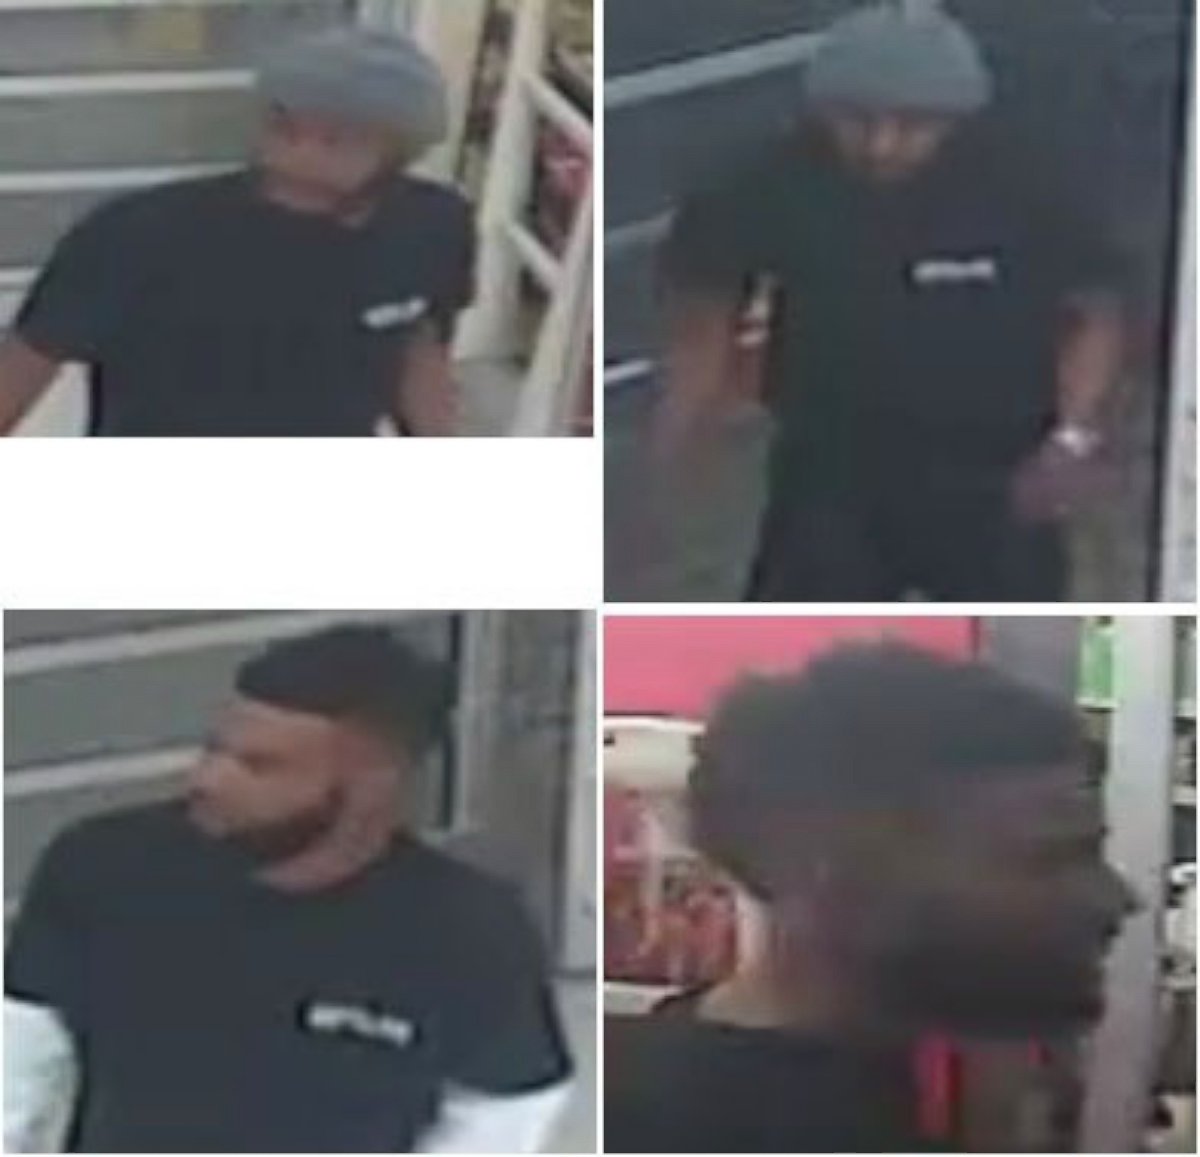 PHOTO: The New Orleans Police Department is seeking to speak with two persons of interest in connection with a fatal shooting that occurred on Feb. 25, 2017.